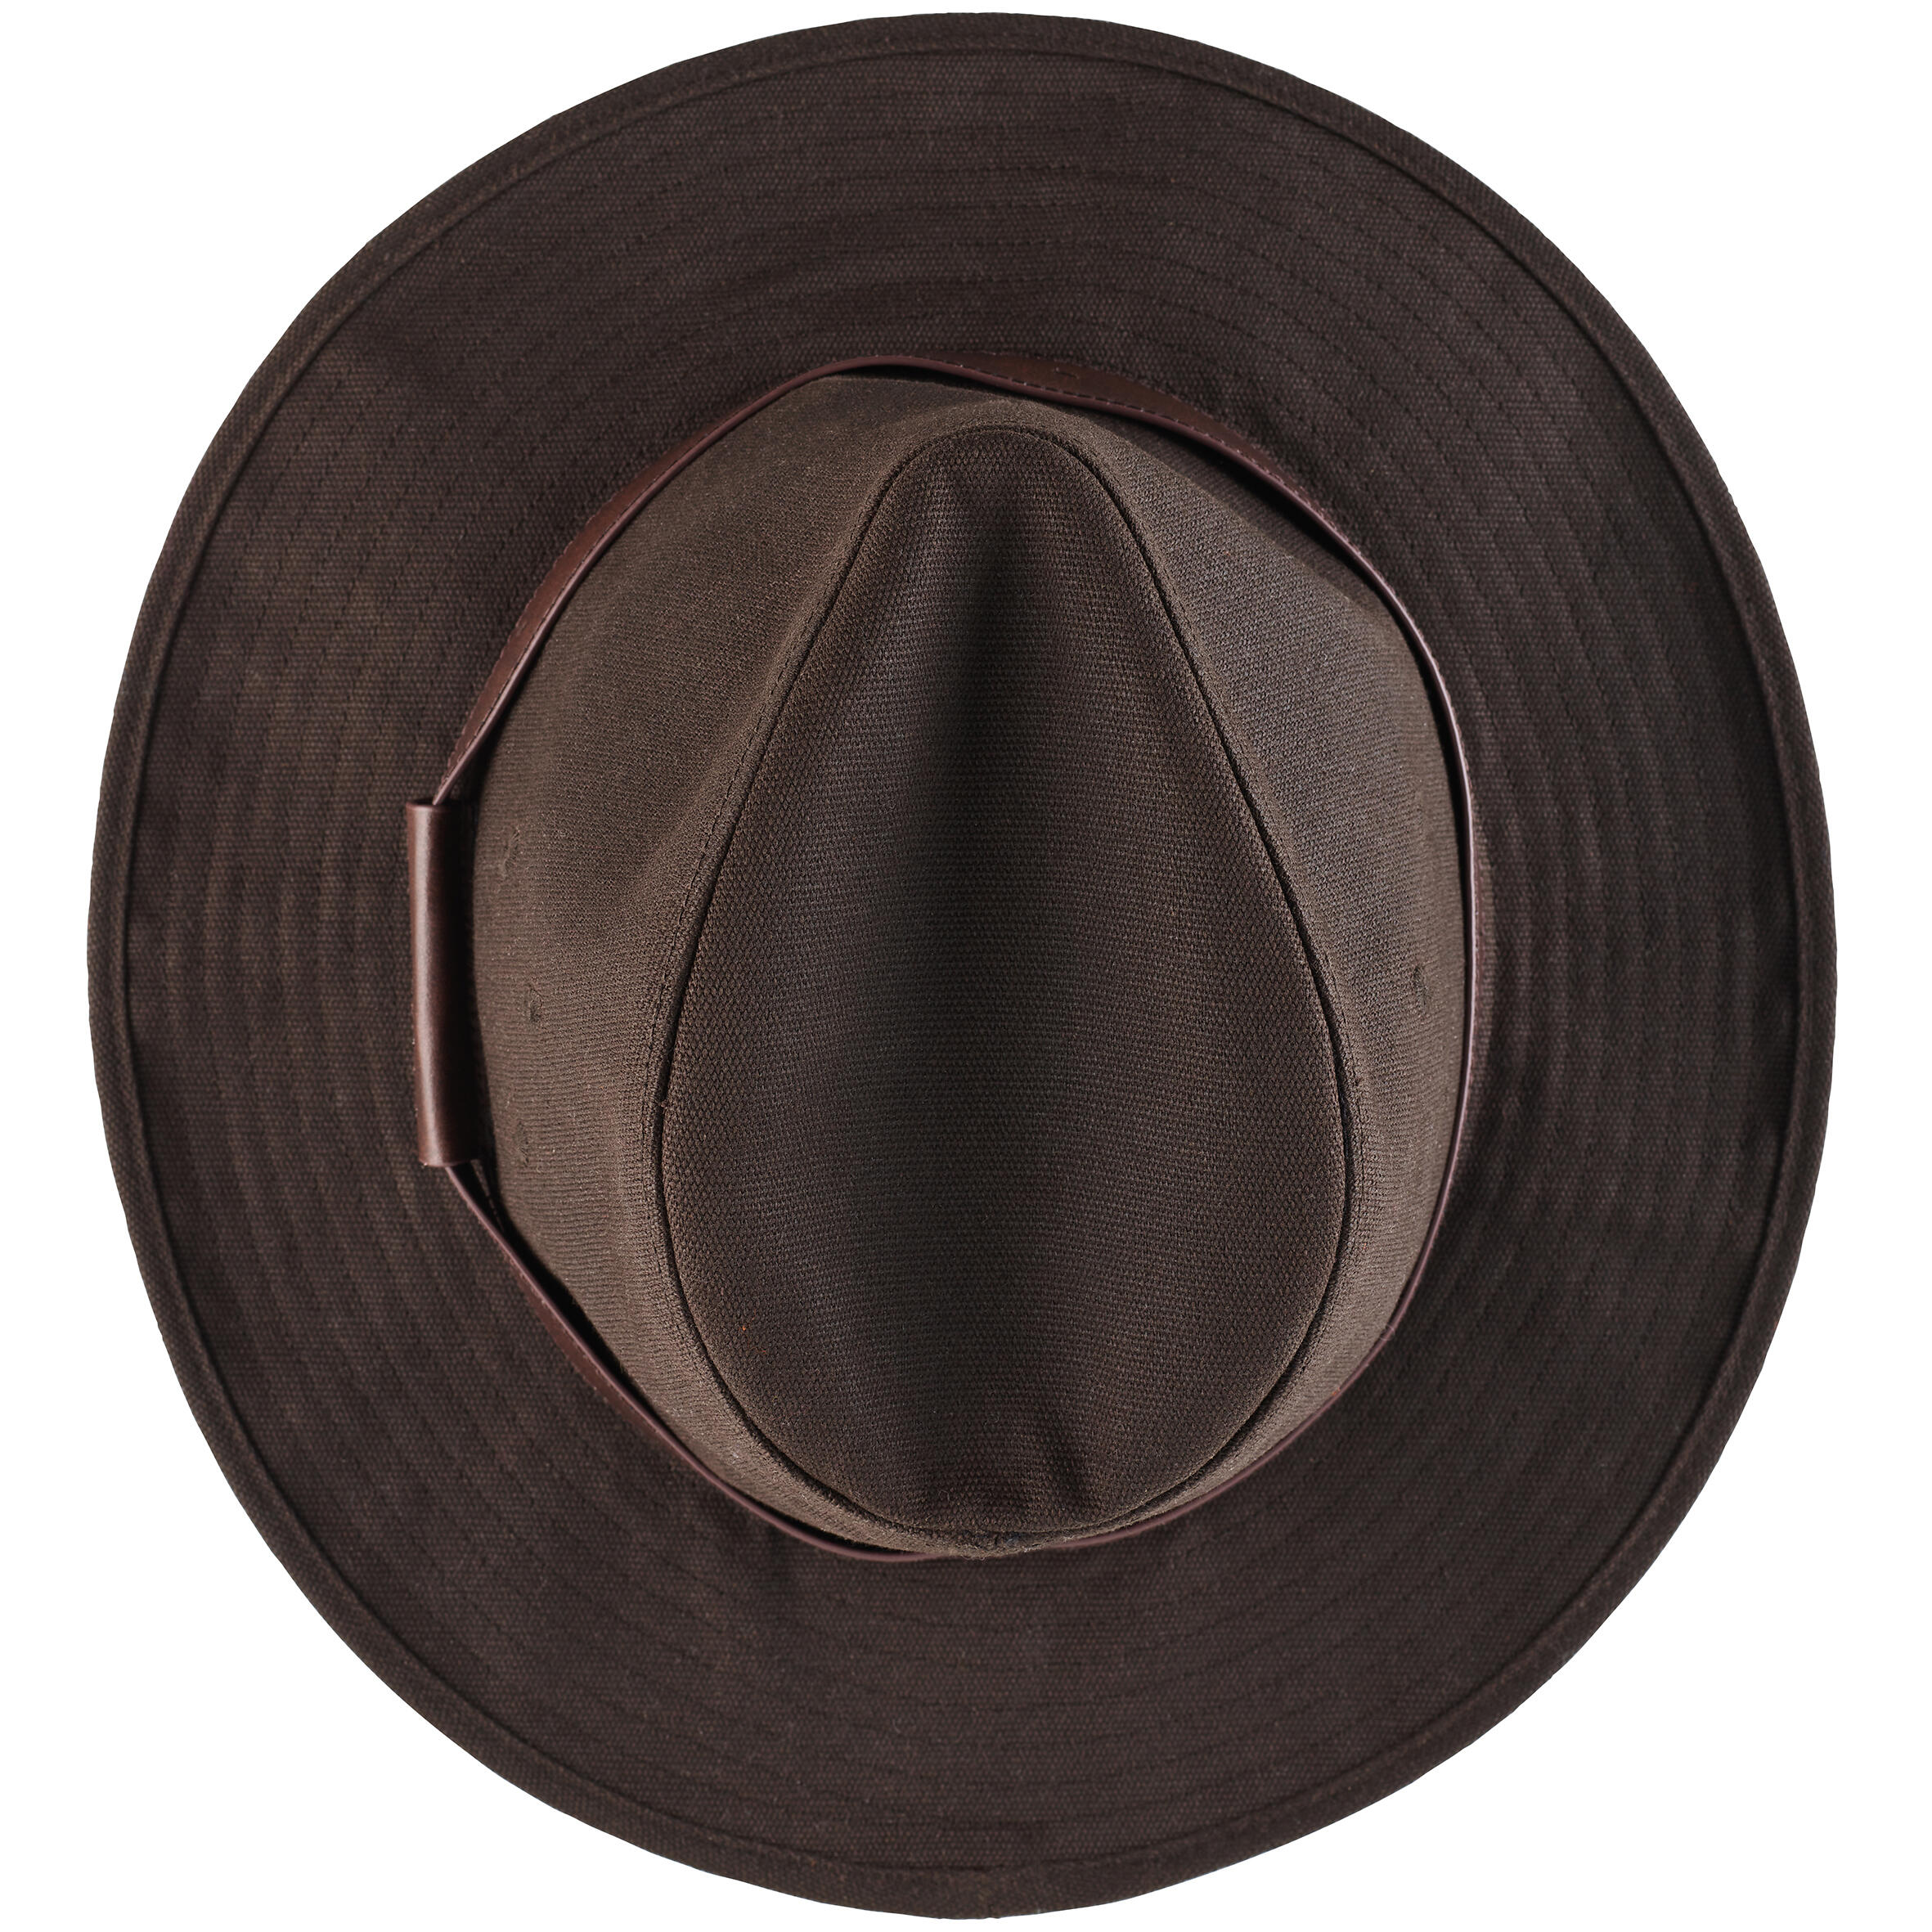 Hunting hat 540, durable and water-repellent 6/7